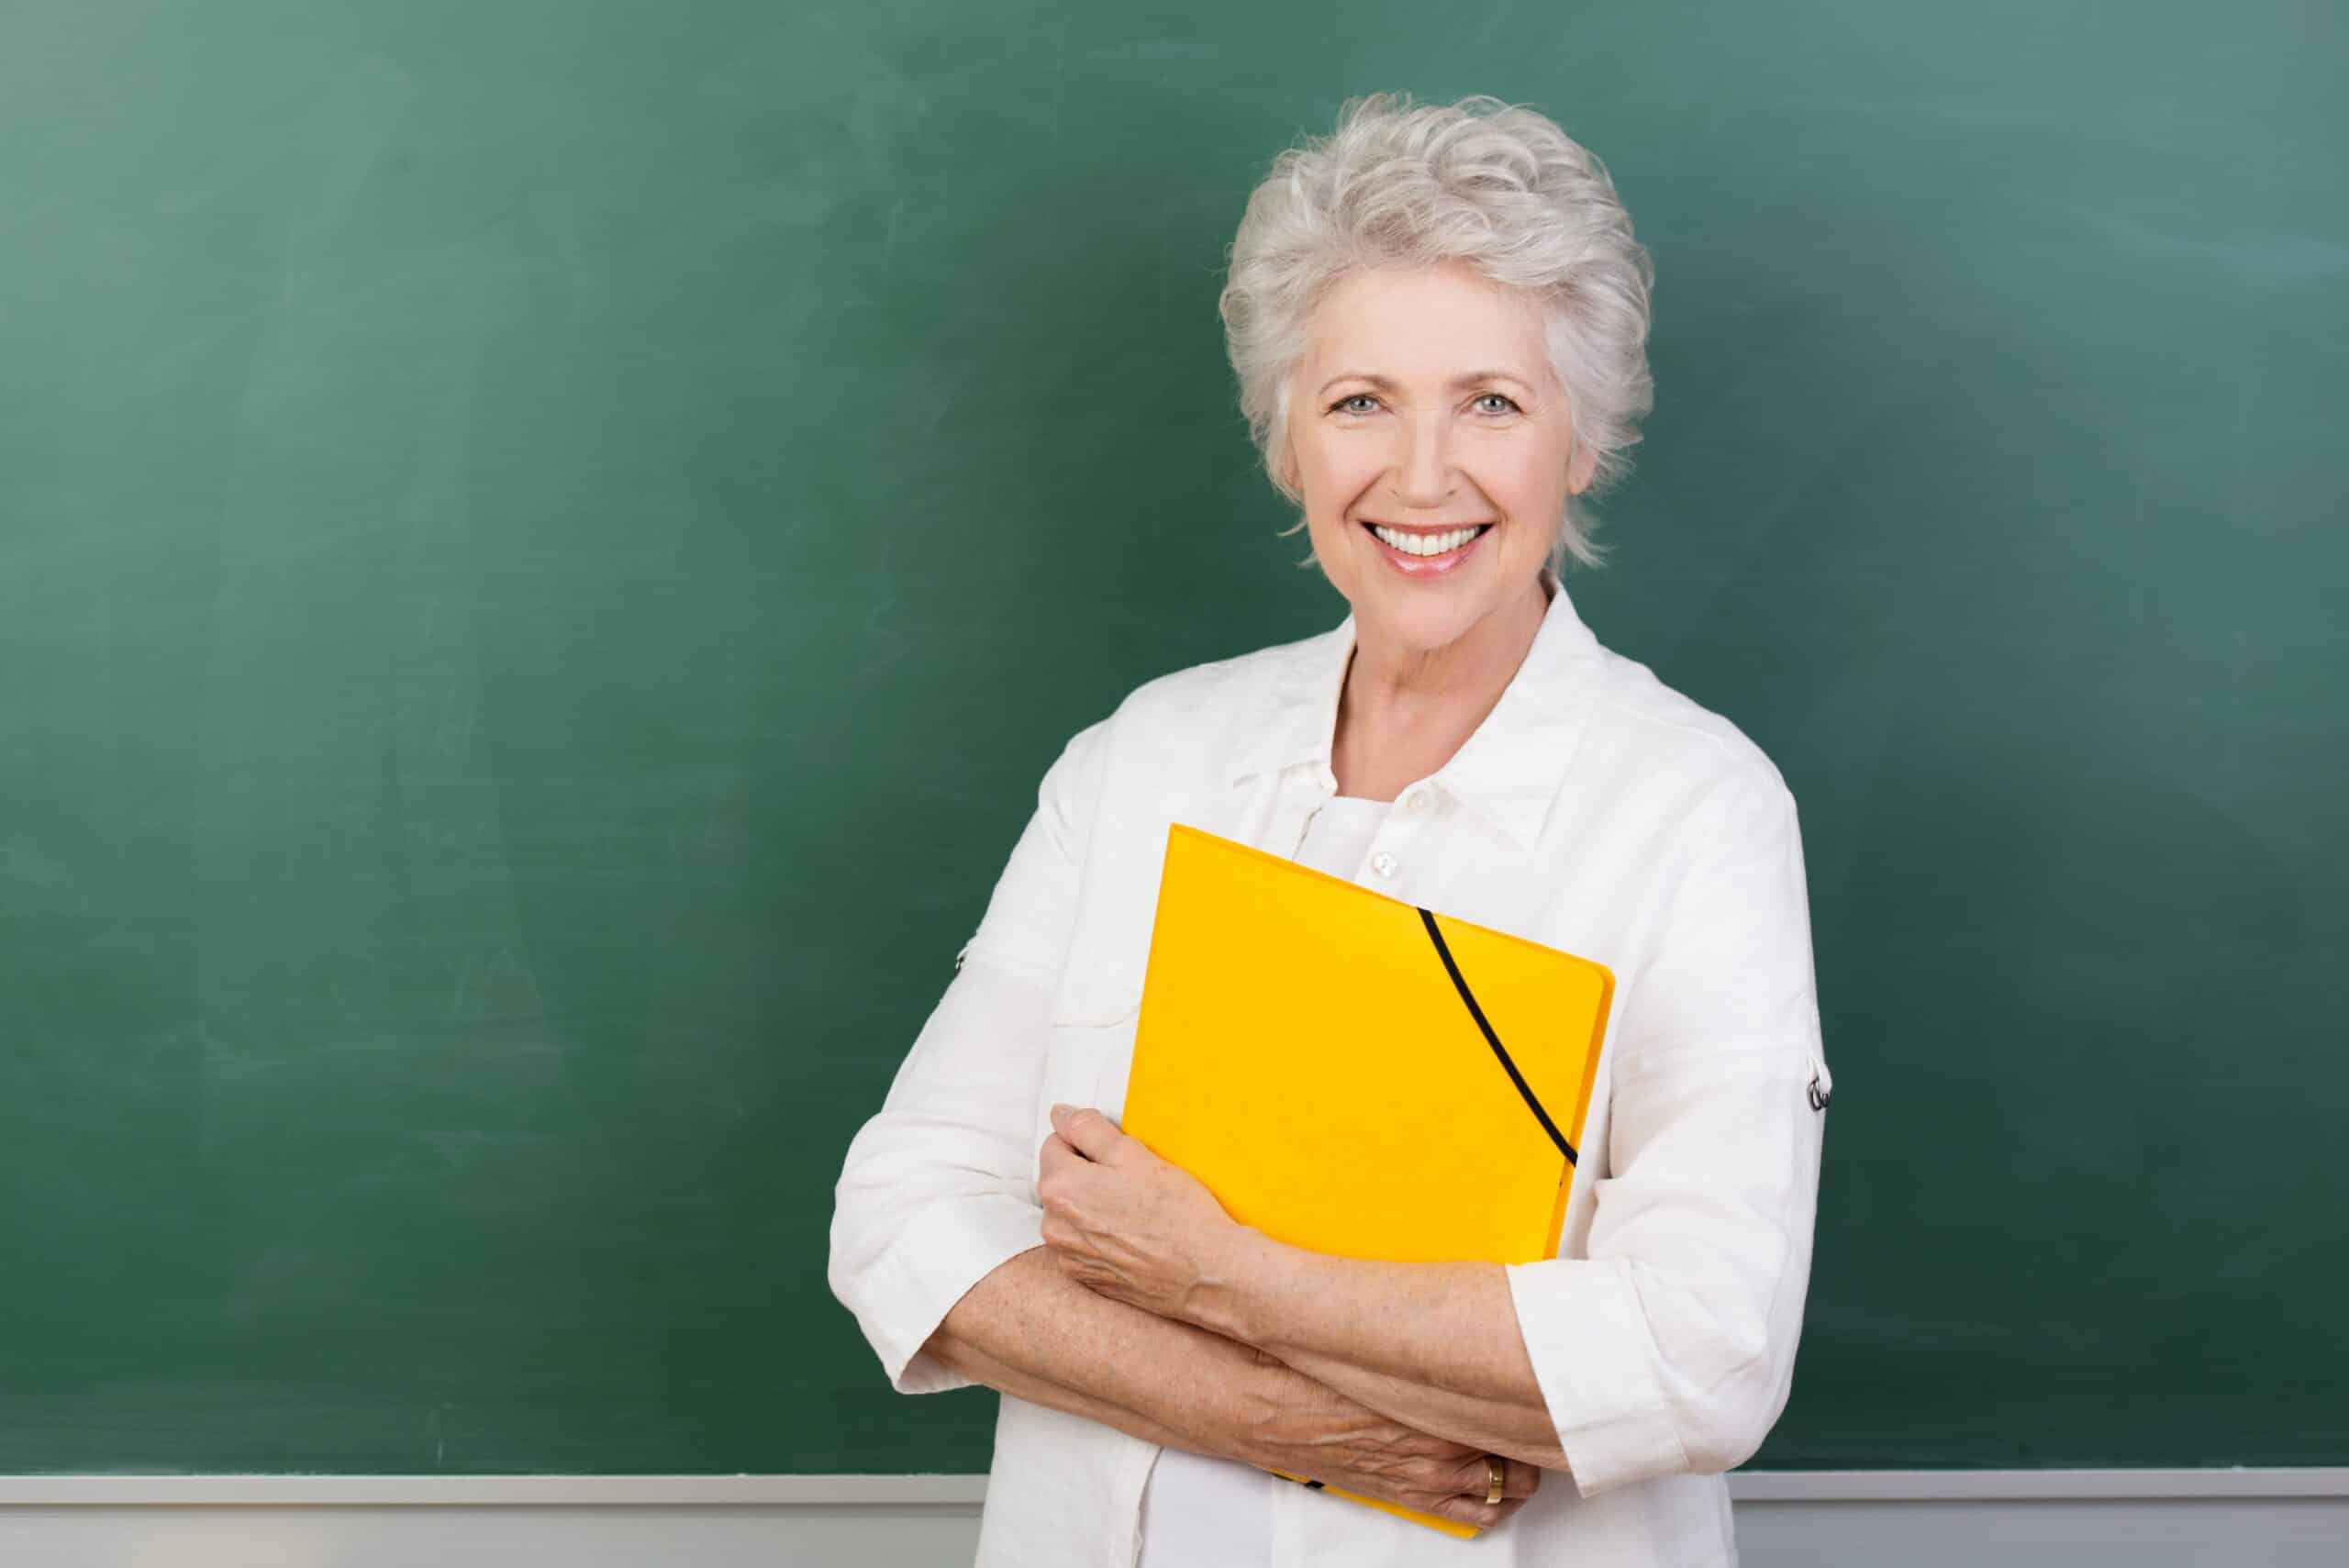 Smiling senior woman holding notebook or folder in front of chalkboard